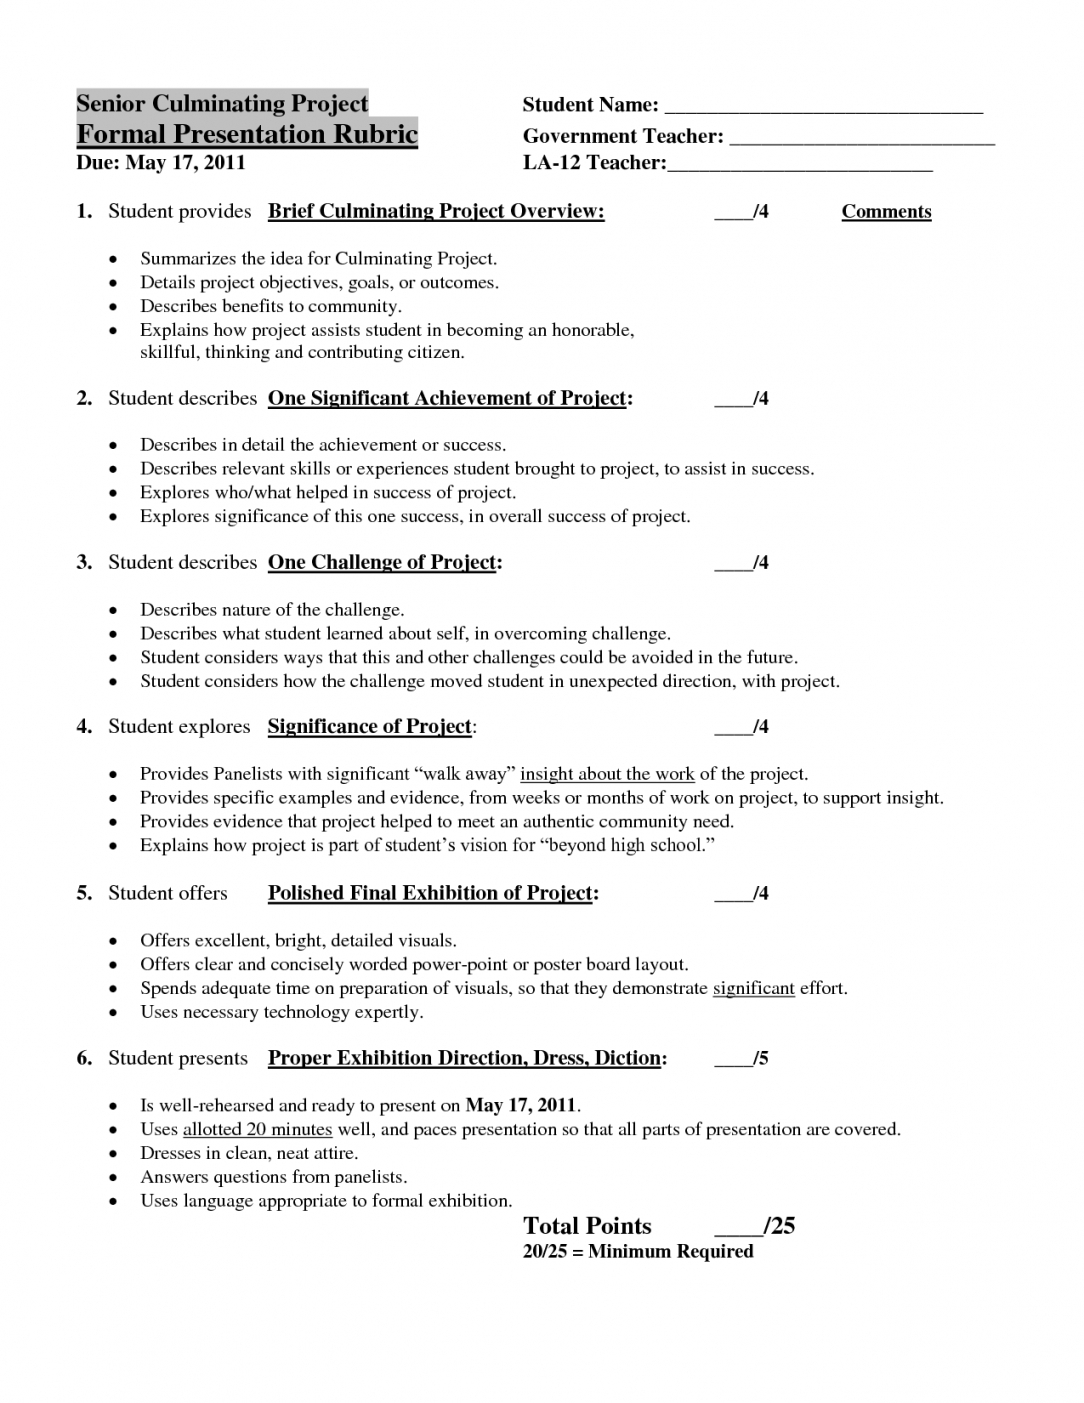 Senior Project Proposal Format And Requirements Chainimage Senior within size 1084 X 1403